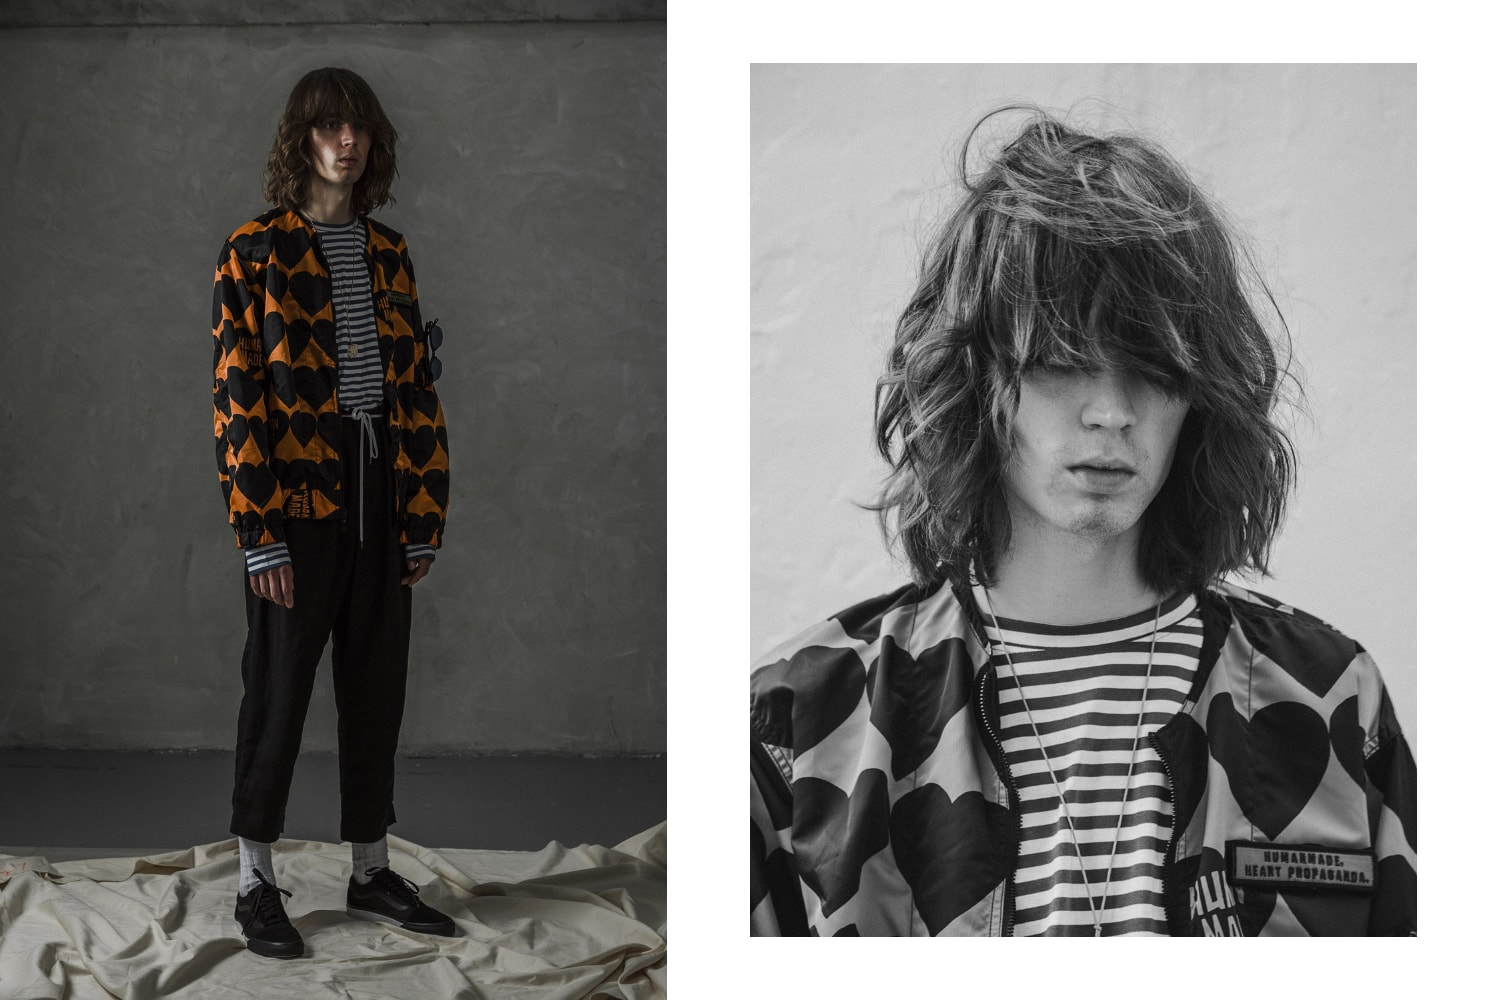 HBX Two Words Editorial PLACES+FACES Heron Preston Human Made Stone Island